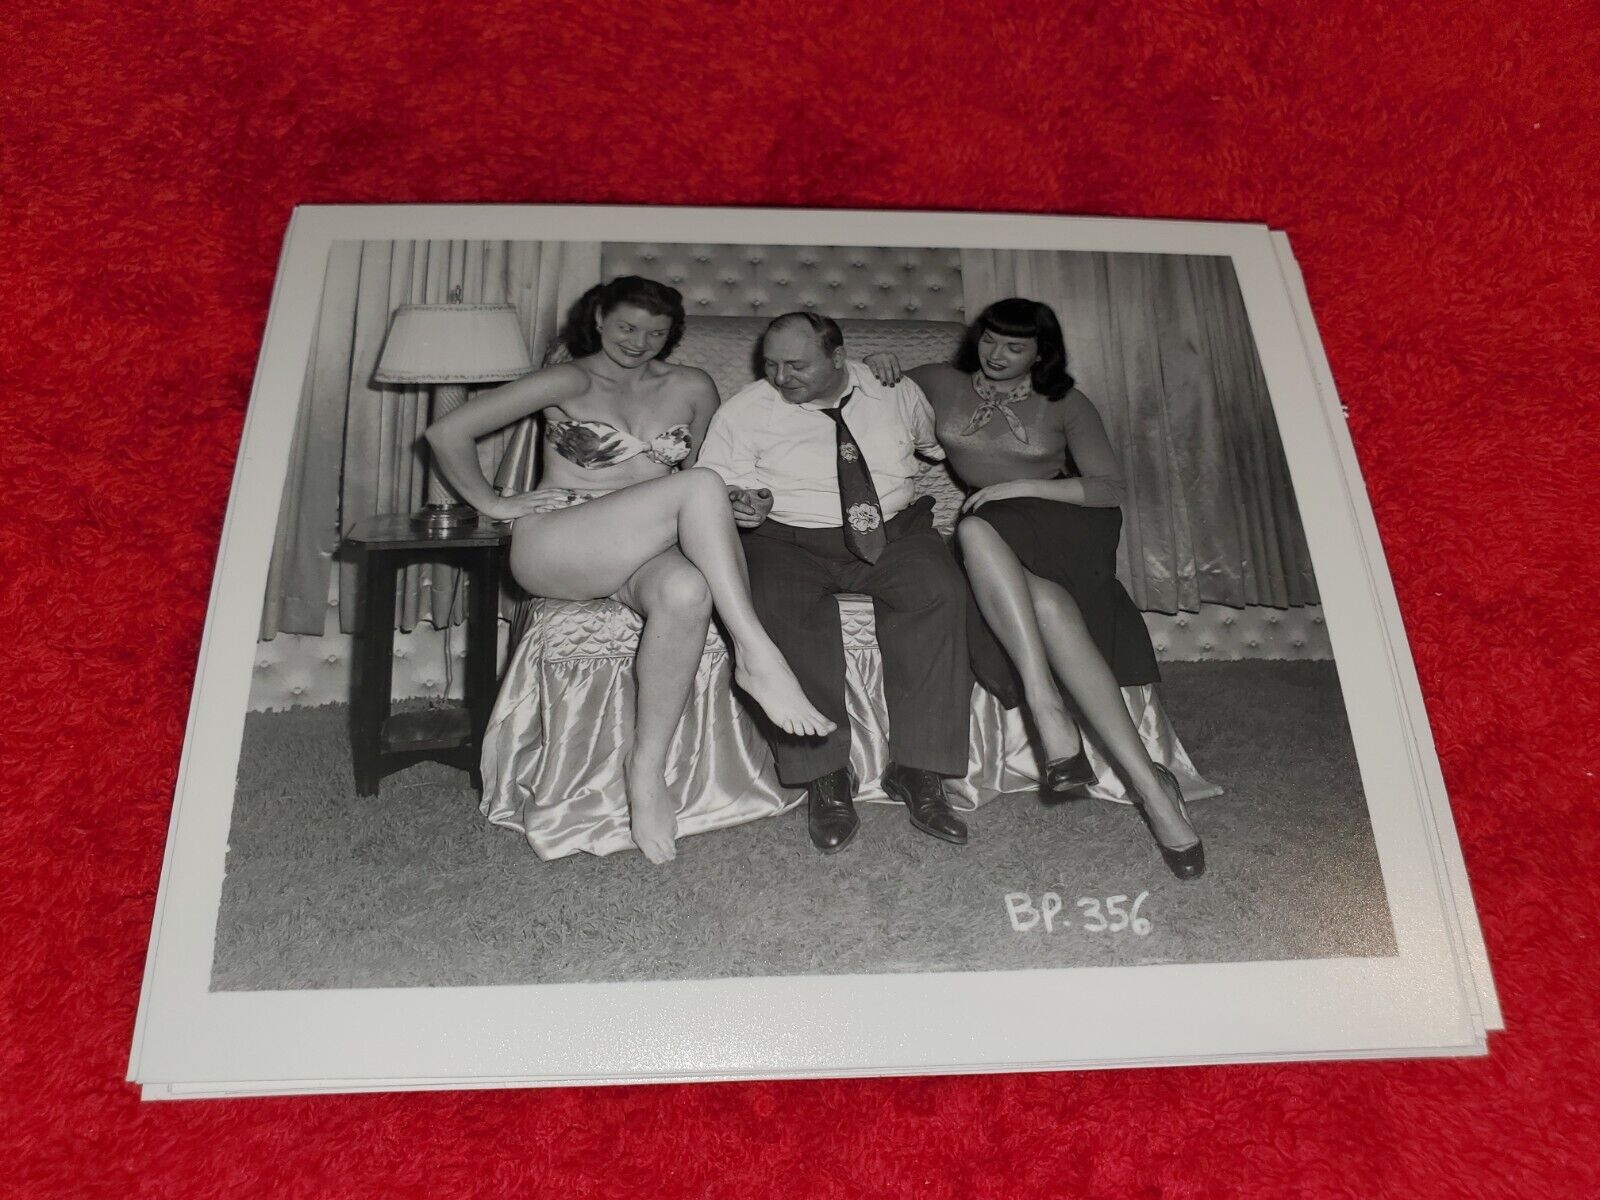 BETTIE PAGE ORIGINAL NEGATIVE 4X5 PRINT FROM IRVING KLAWS ARCHIVES  BP-356